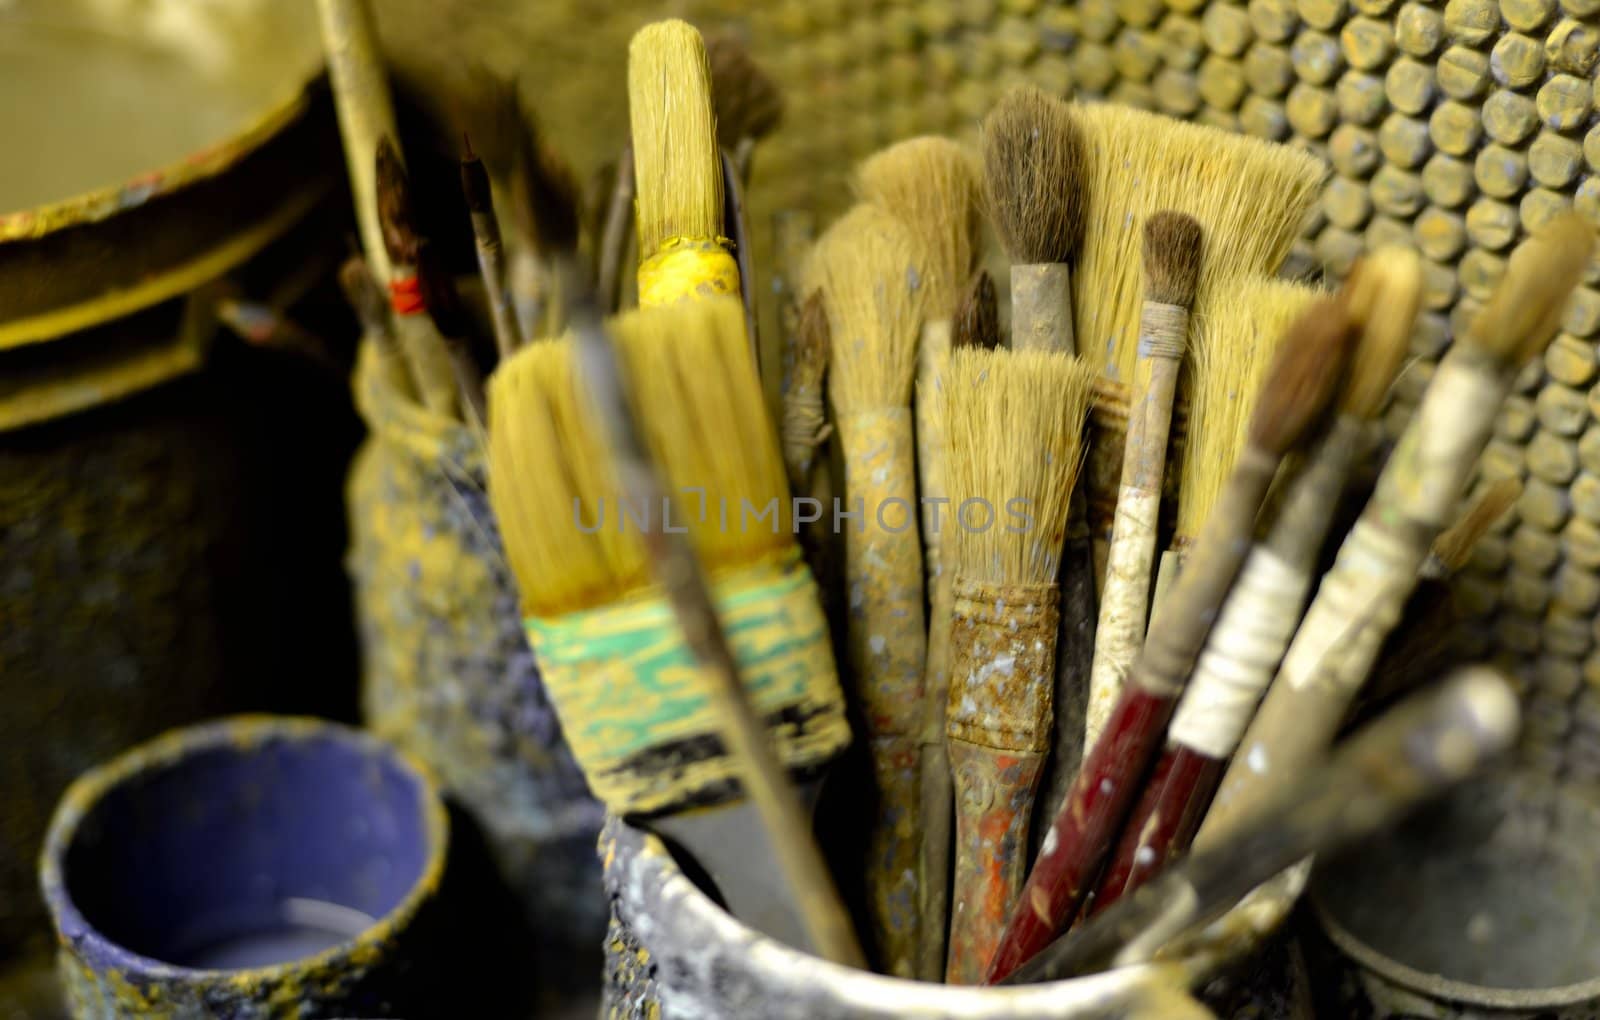 The tools for pottery's decoration in Tuscany